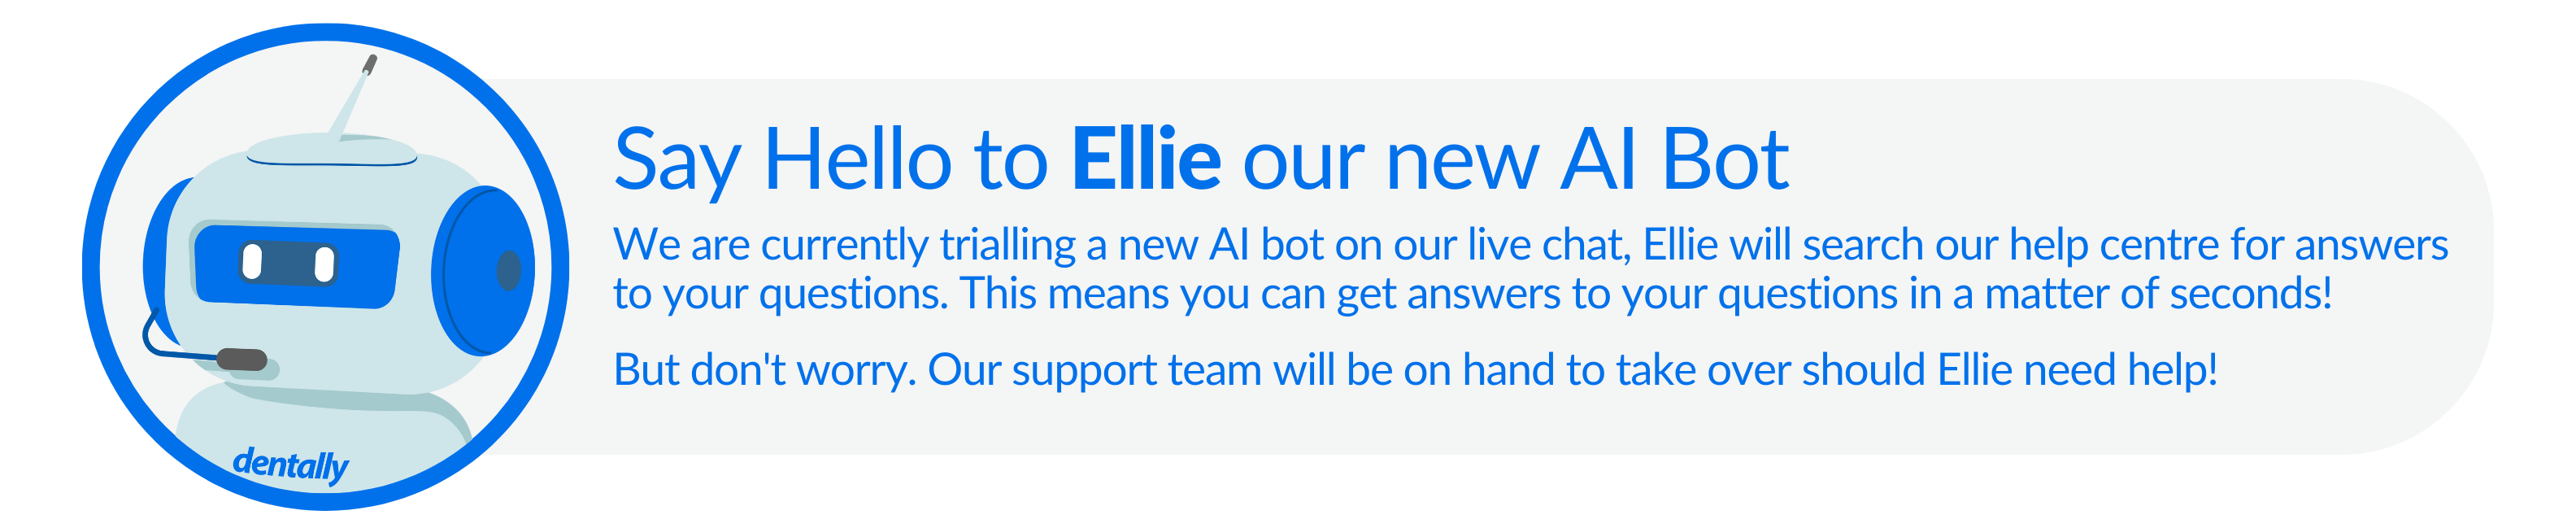 say hello to Ellie our new AI bot